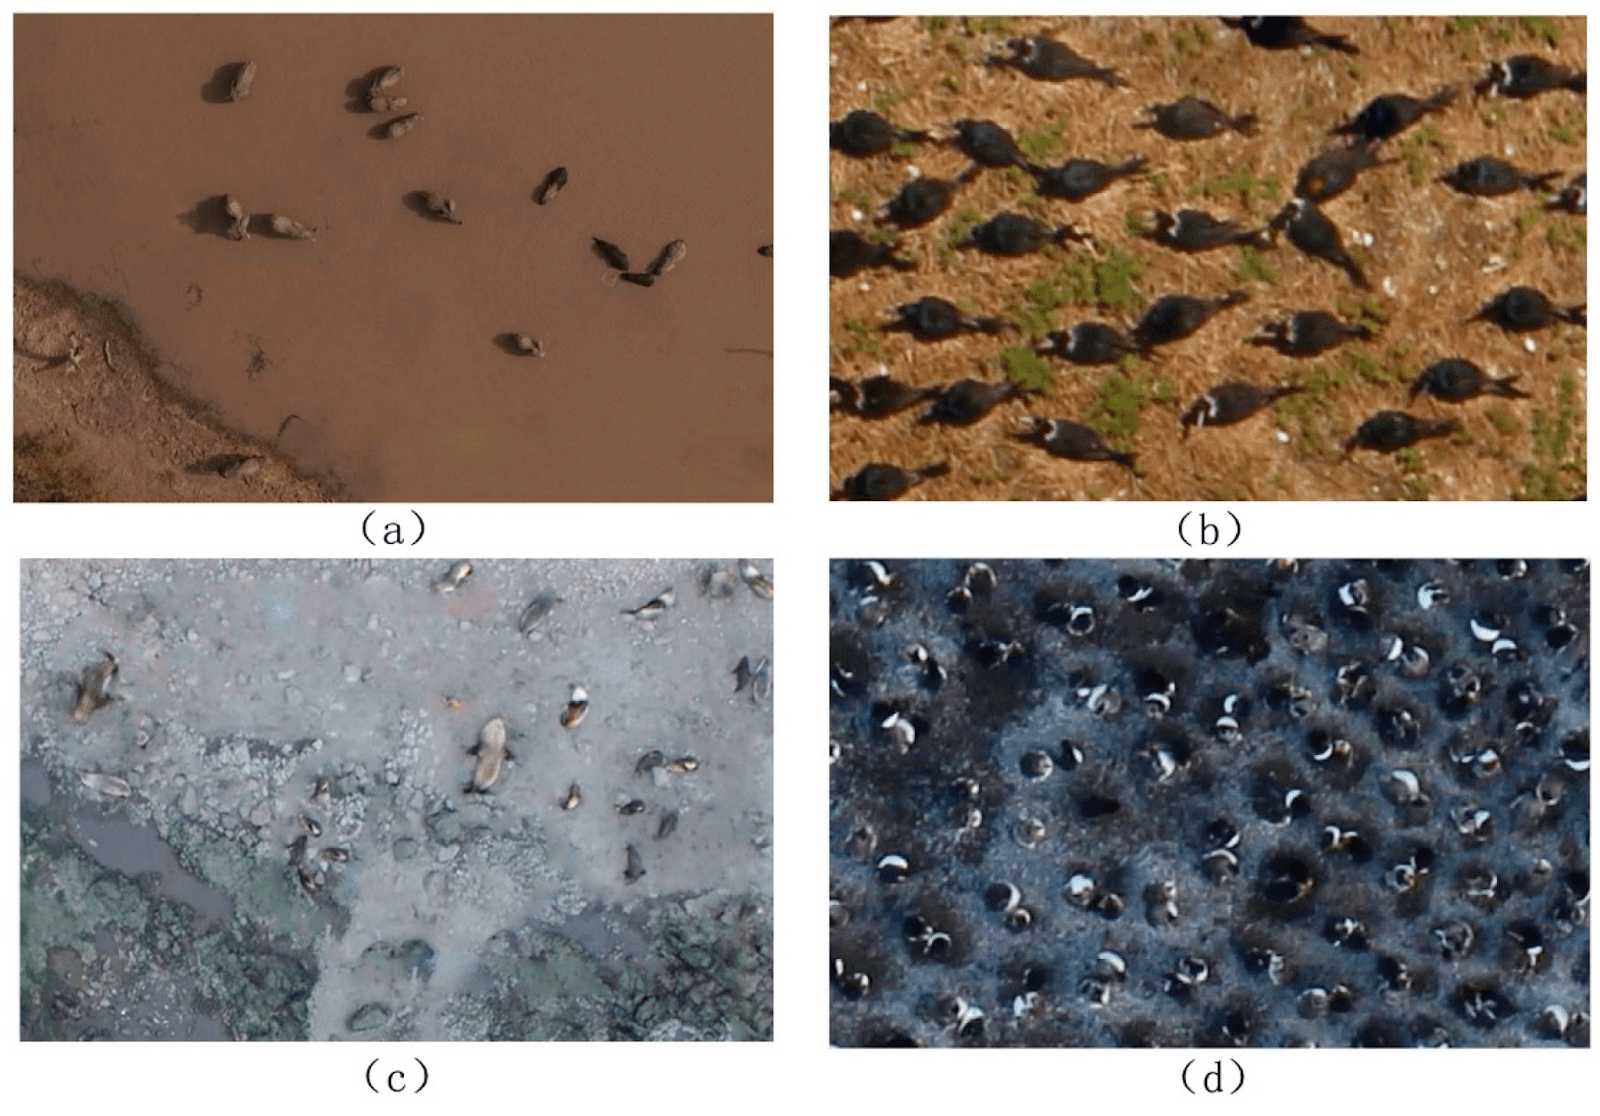 Monitoring wildlife is one of the many applications of aerial imaging